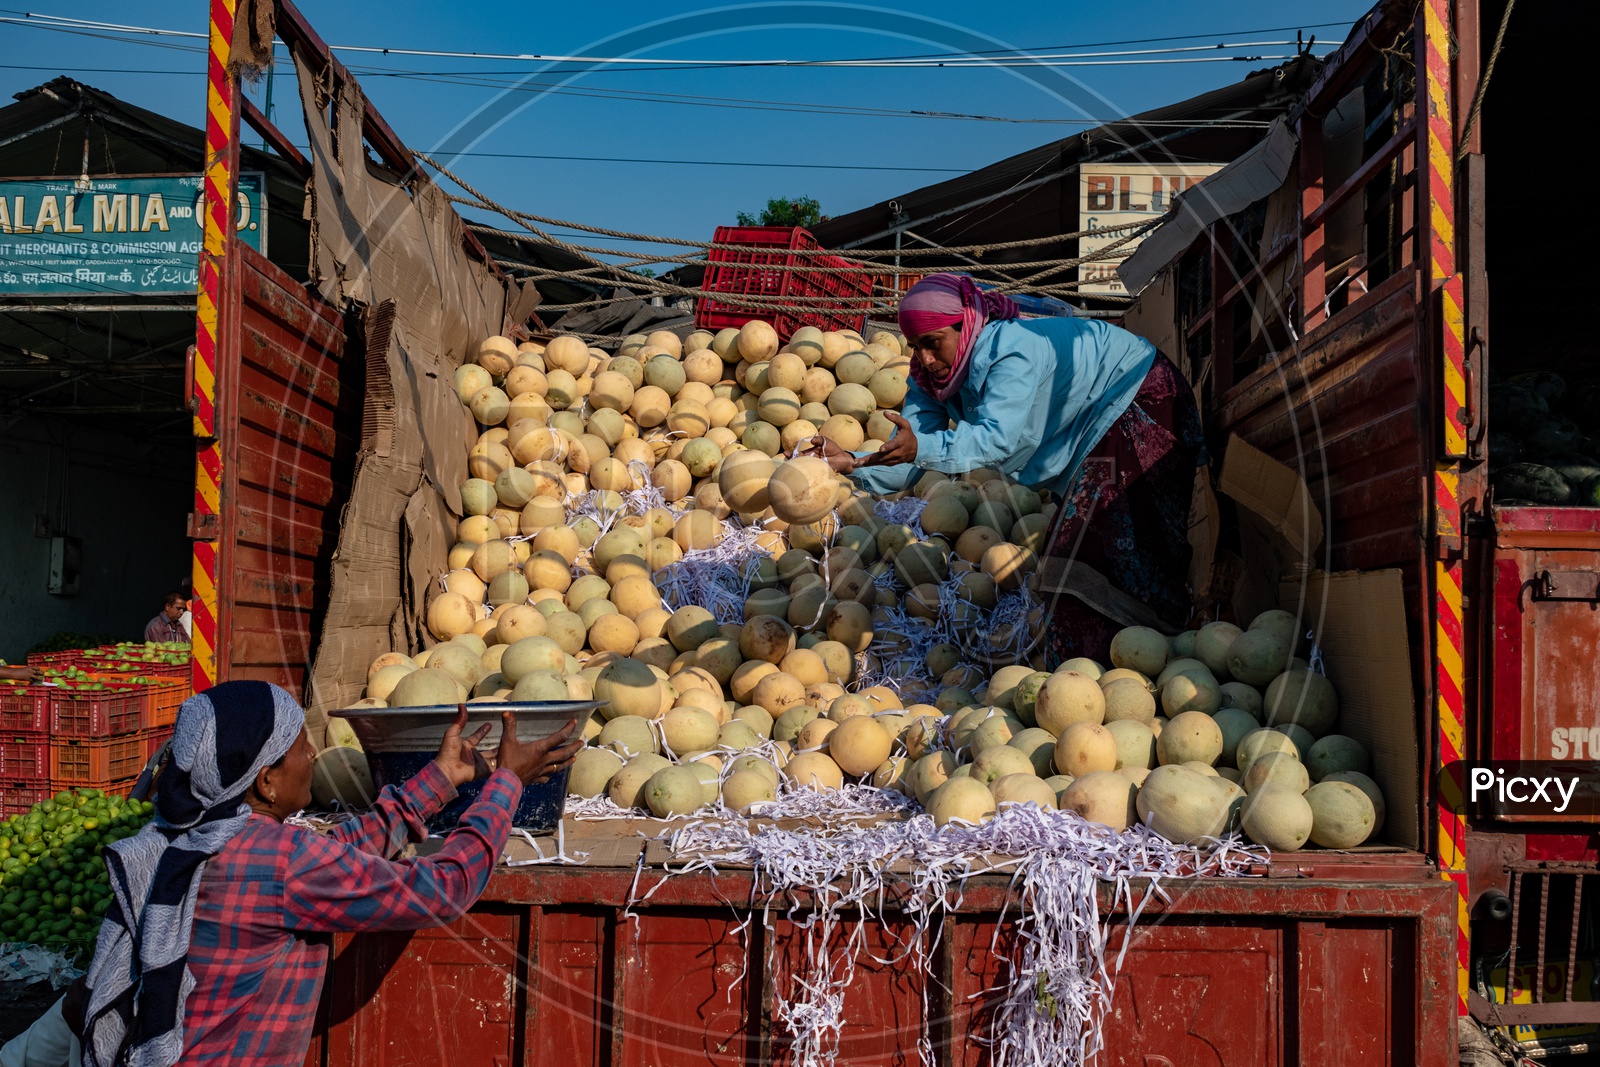 A woman unloading the muskmelon fruits from a lorry at Kothapet Fruit market, Hyderabad.